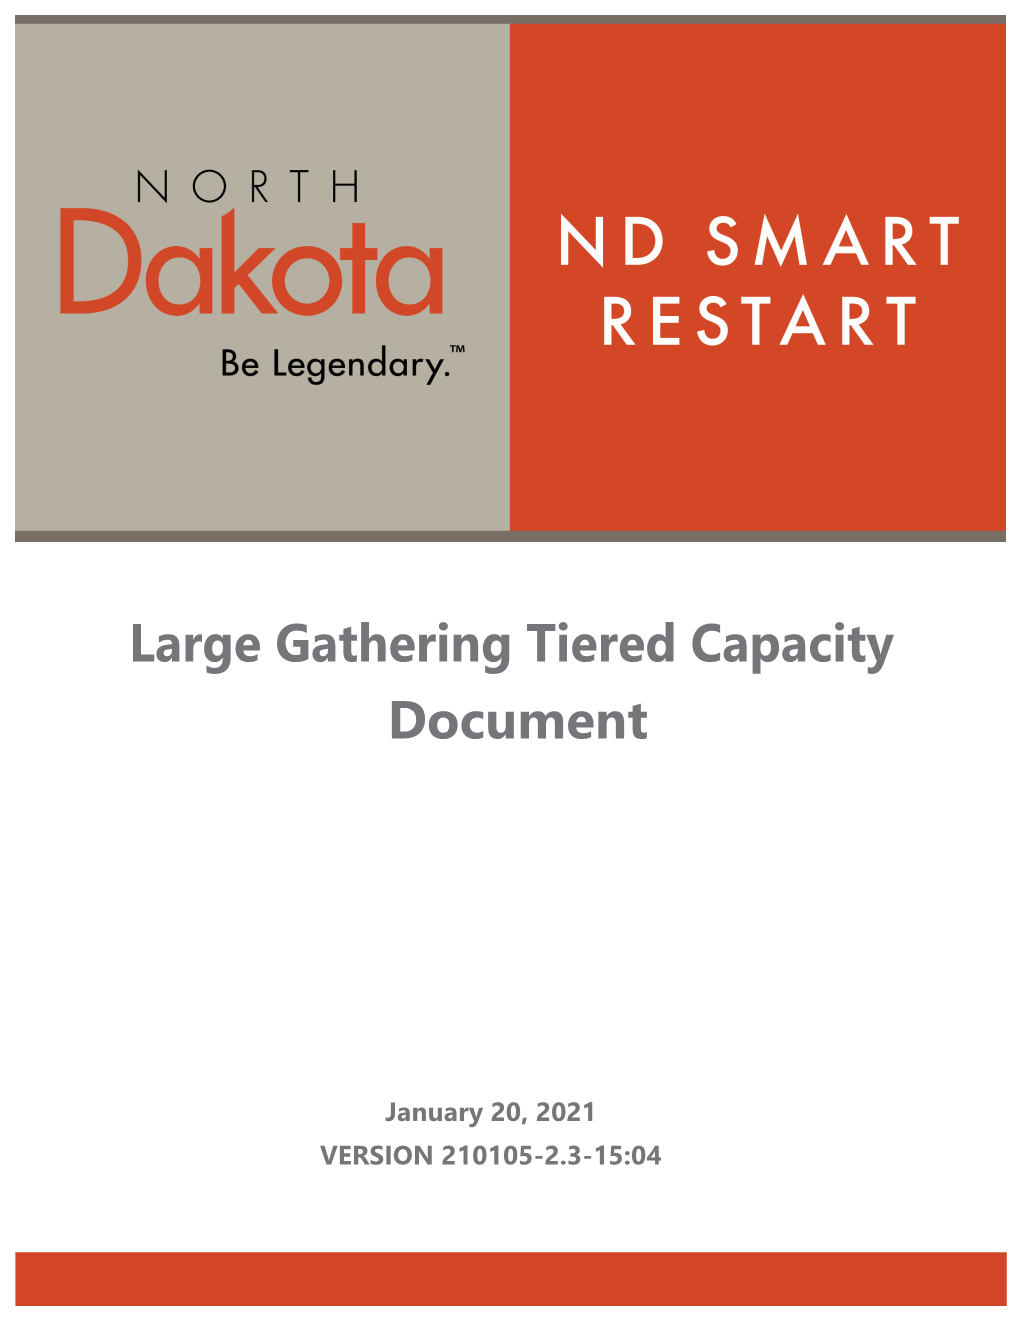 Large Gathering Tiered Capacity Document